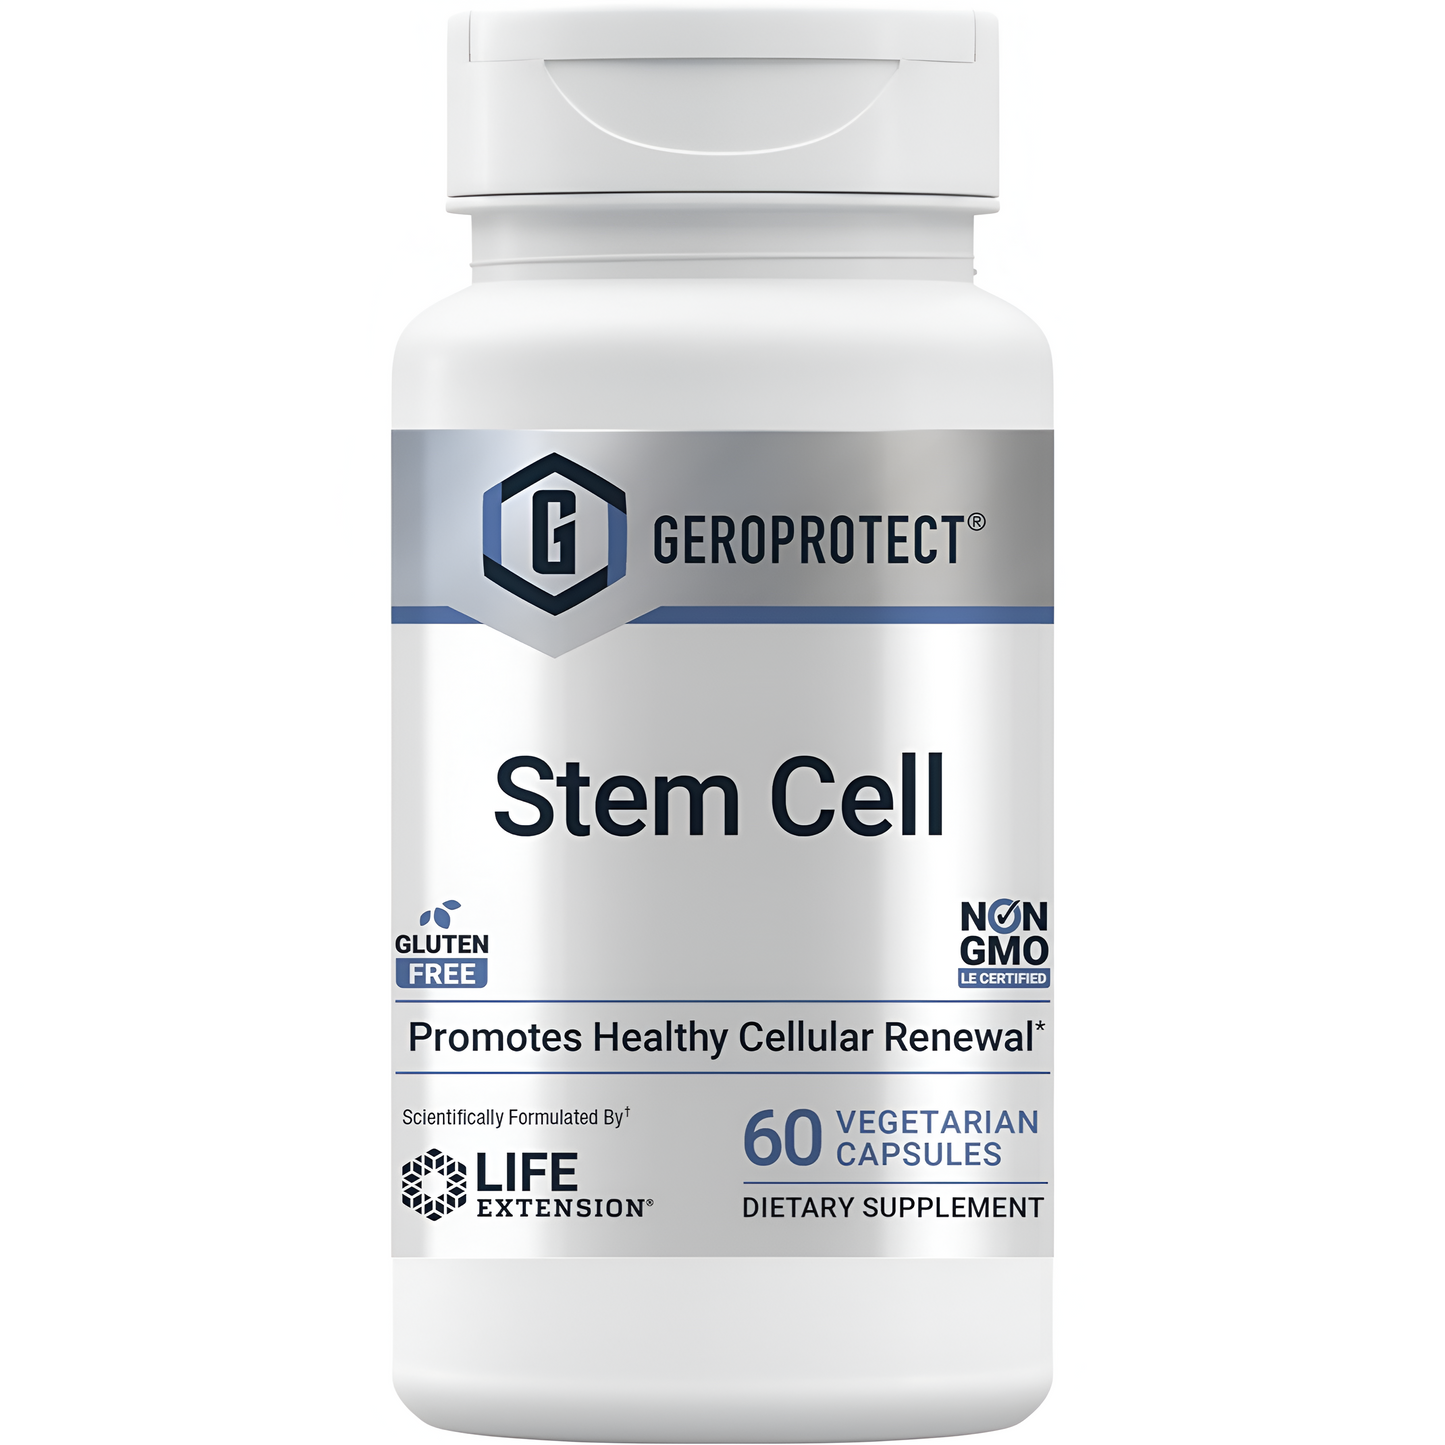 Life Extension GeroProtect Stem Cell